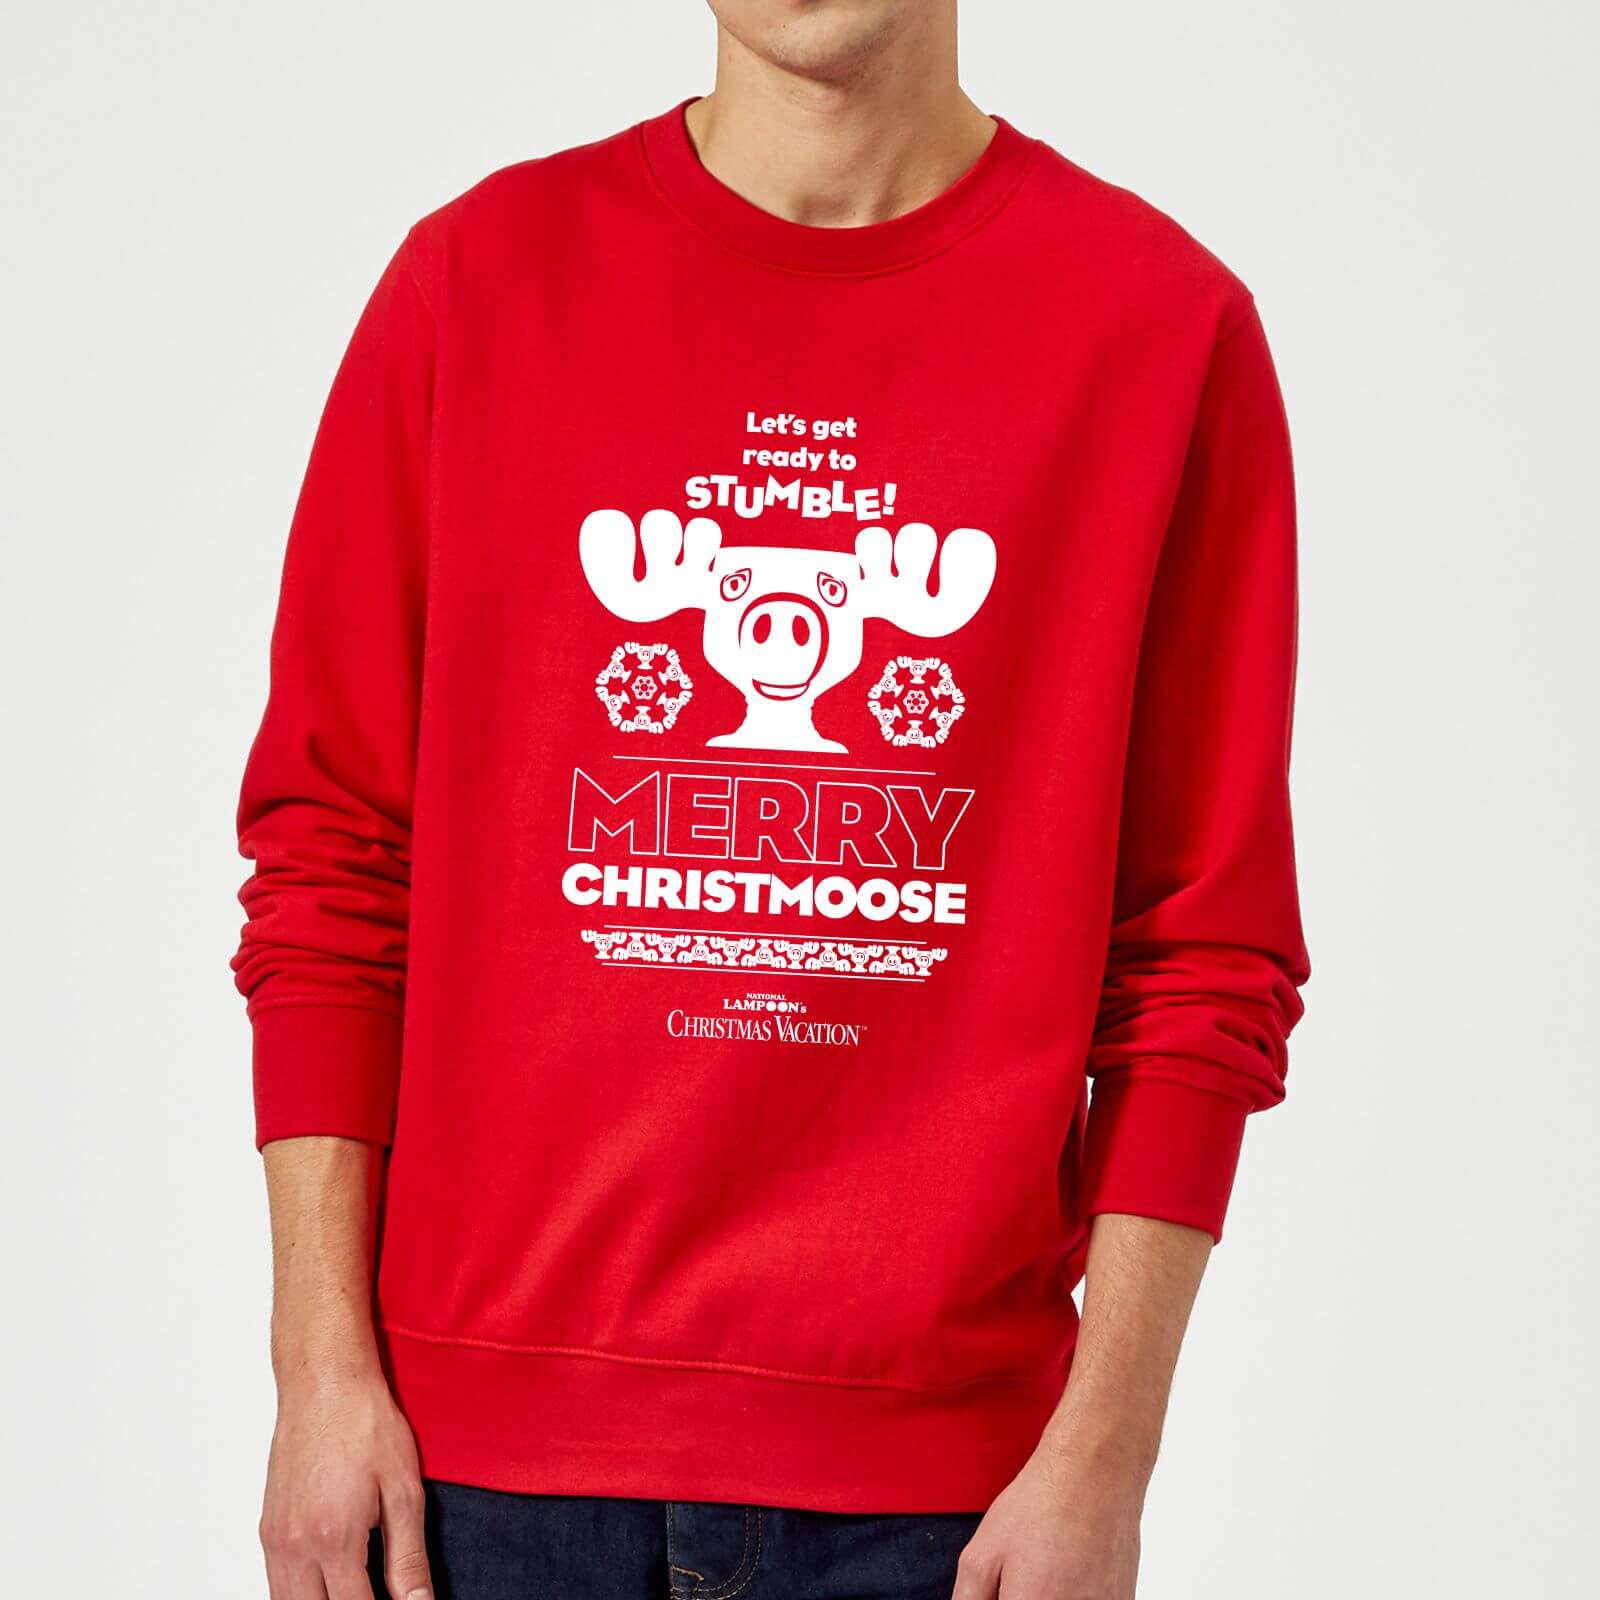 National Lampoon Merry Christmoose Christmas Jumper - Red - L